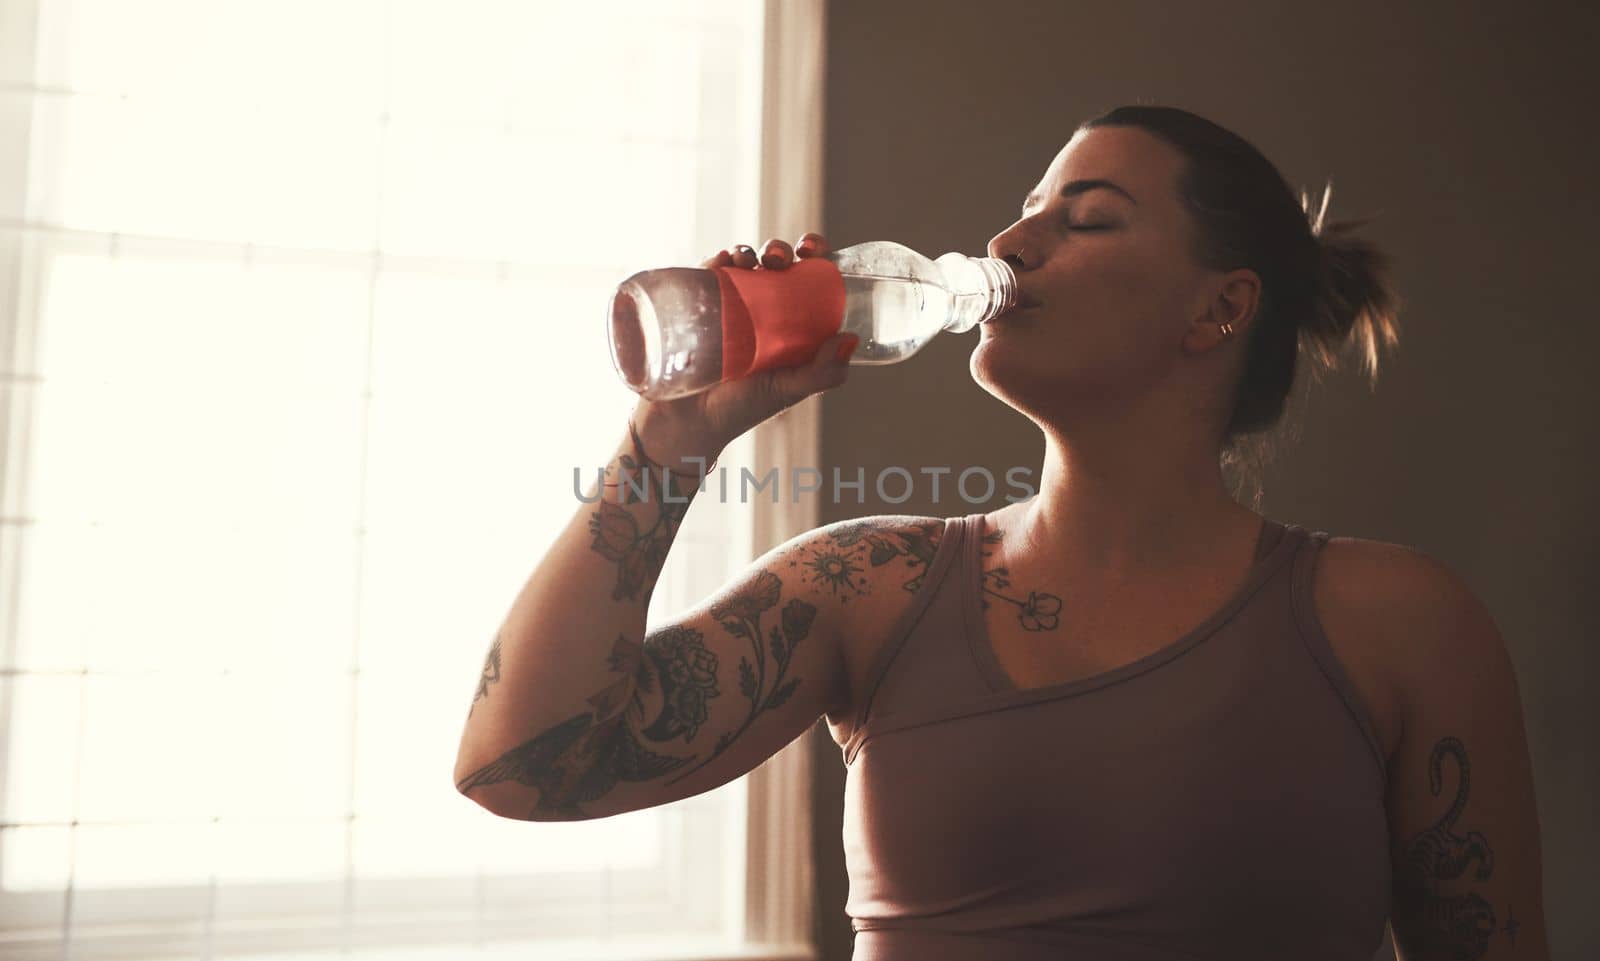 Its vital to drink water before, during and after exercise. a young woman drinking water after her workout at home